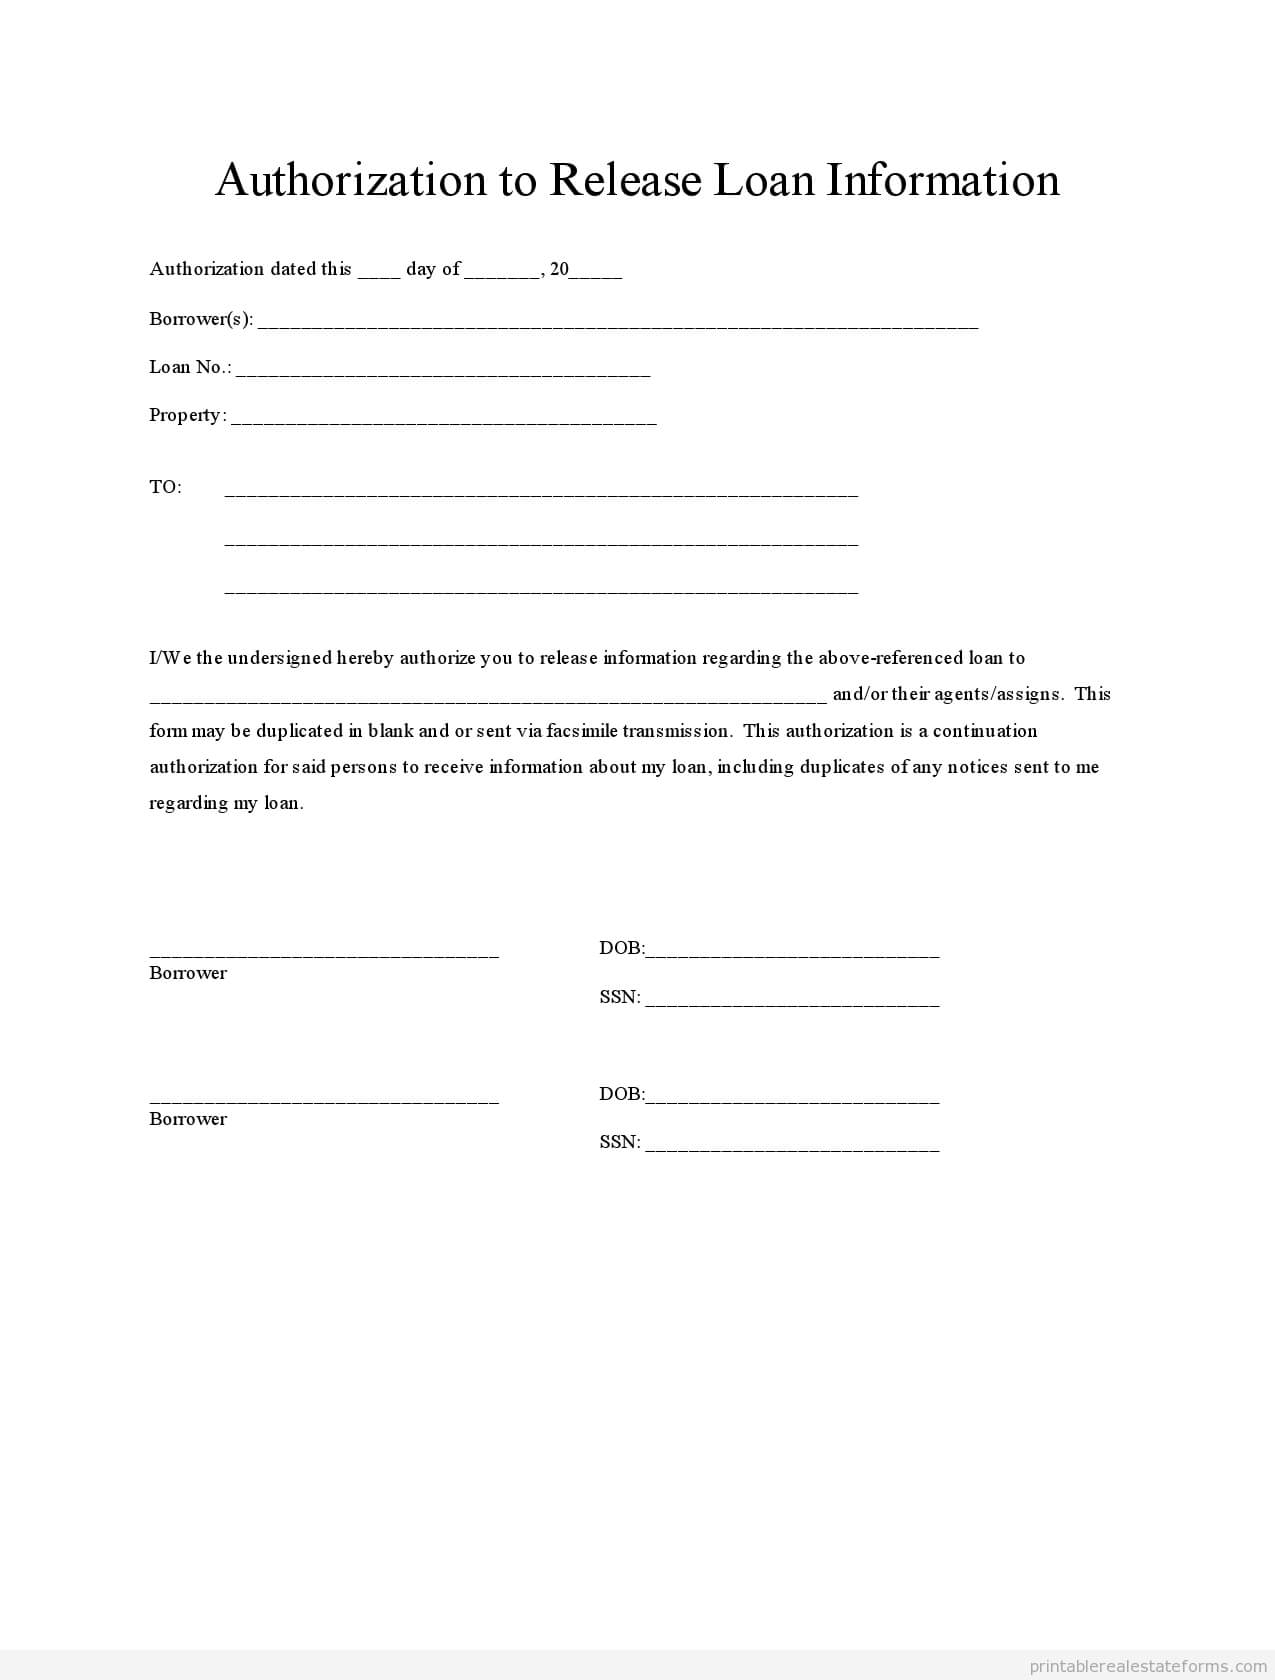 Printable Loan Authorization 2 Template 2015 | Sample Forms With Blank Legal Document Template